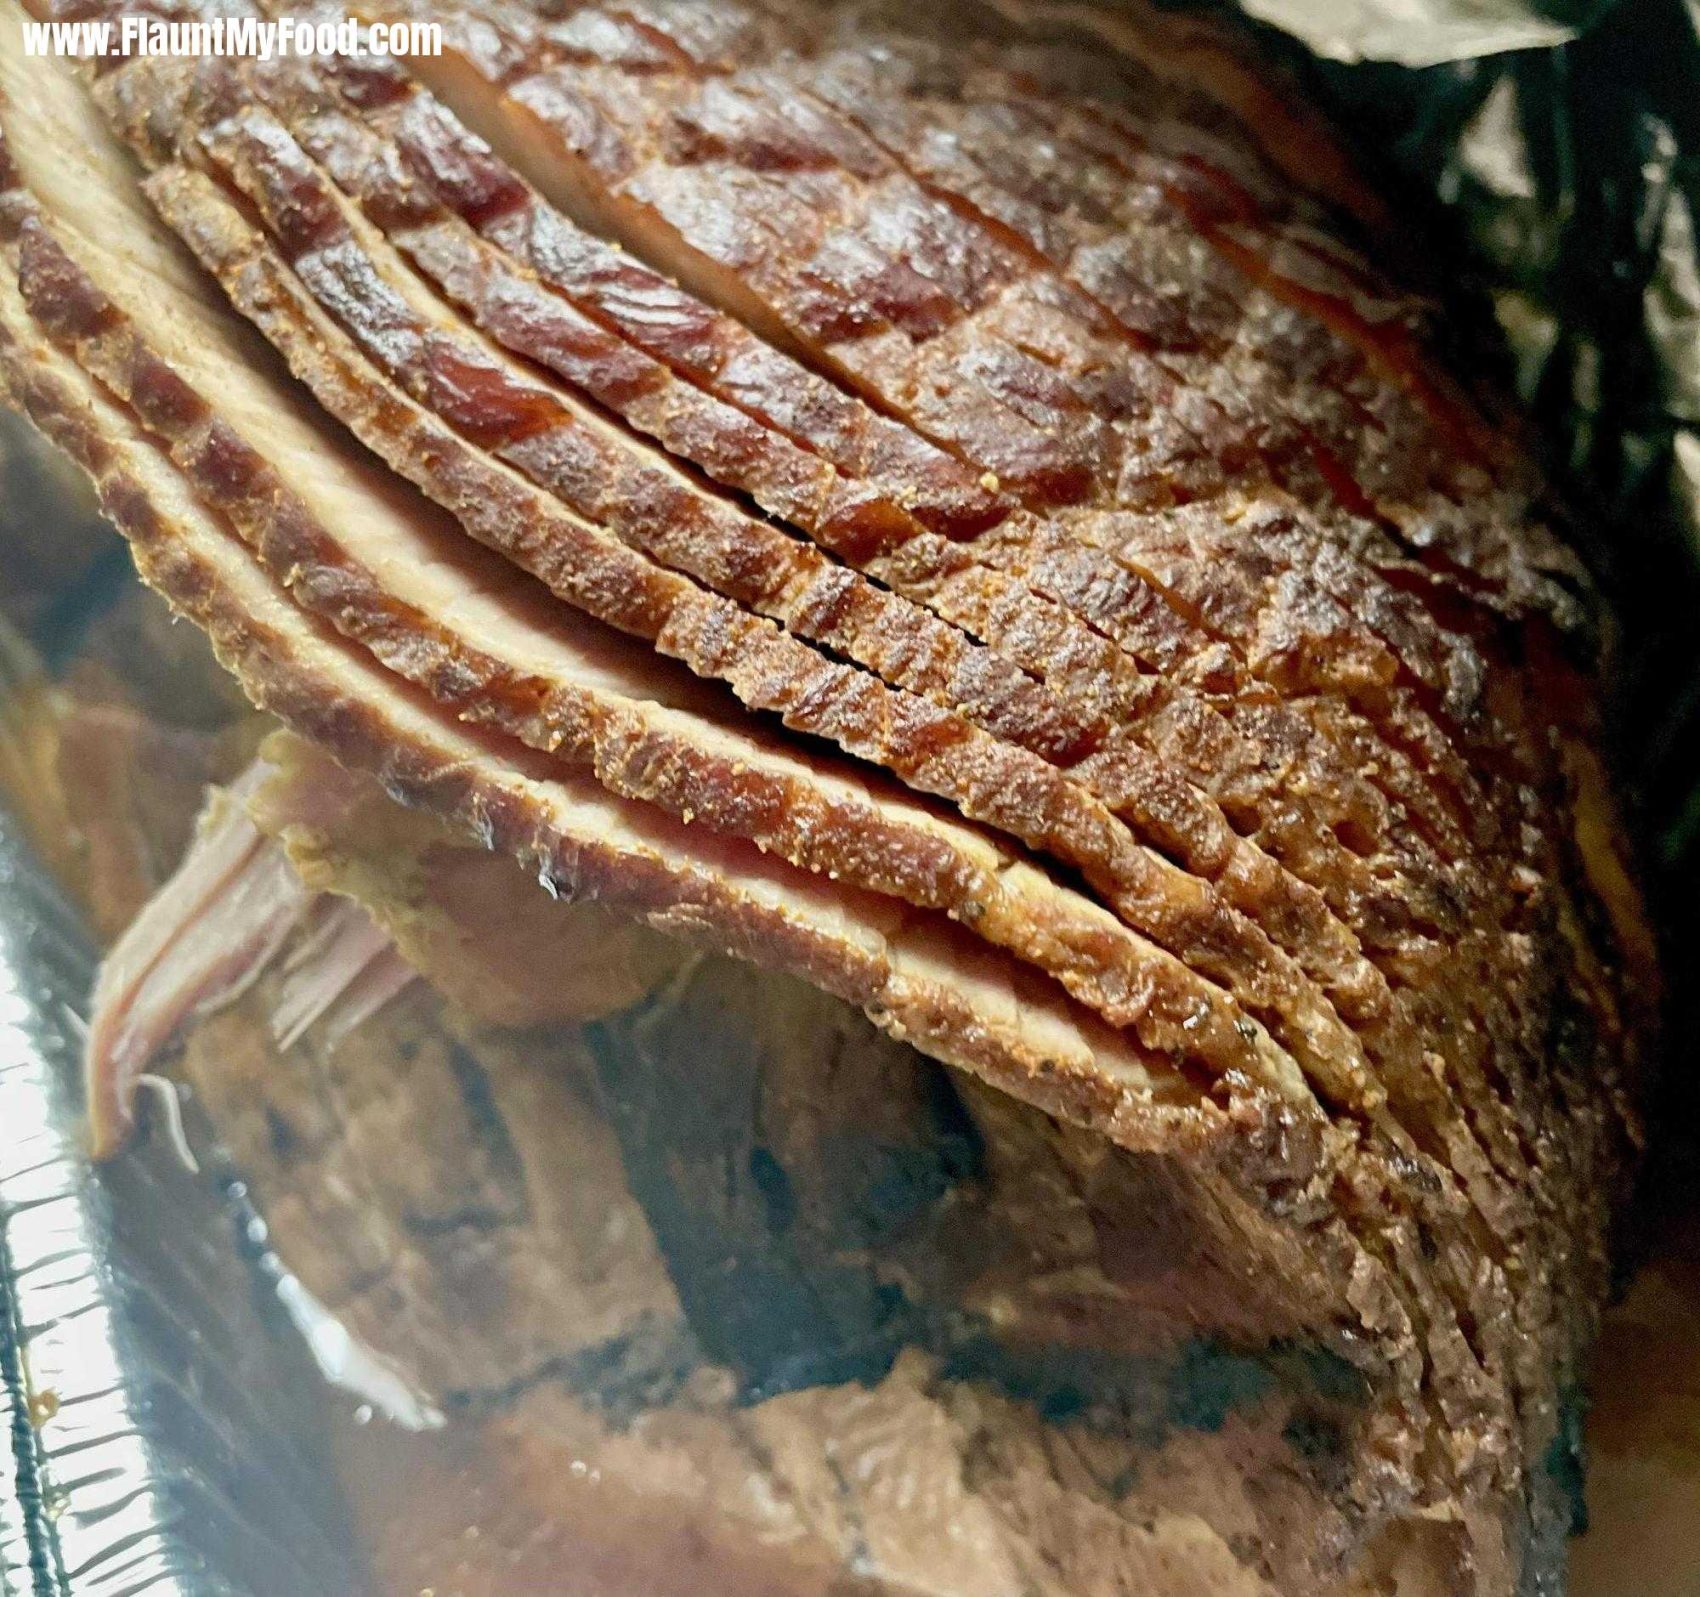 Smoked Christmas ham by KapQue in Fort Worth TexasSmoked Christmas ham by KapQue artisan meats in Fort Worth Texas